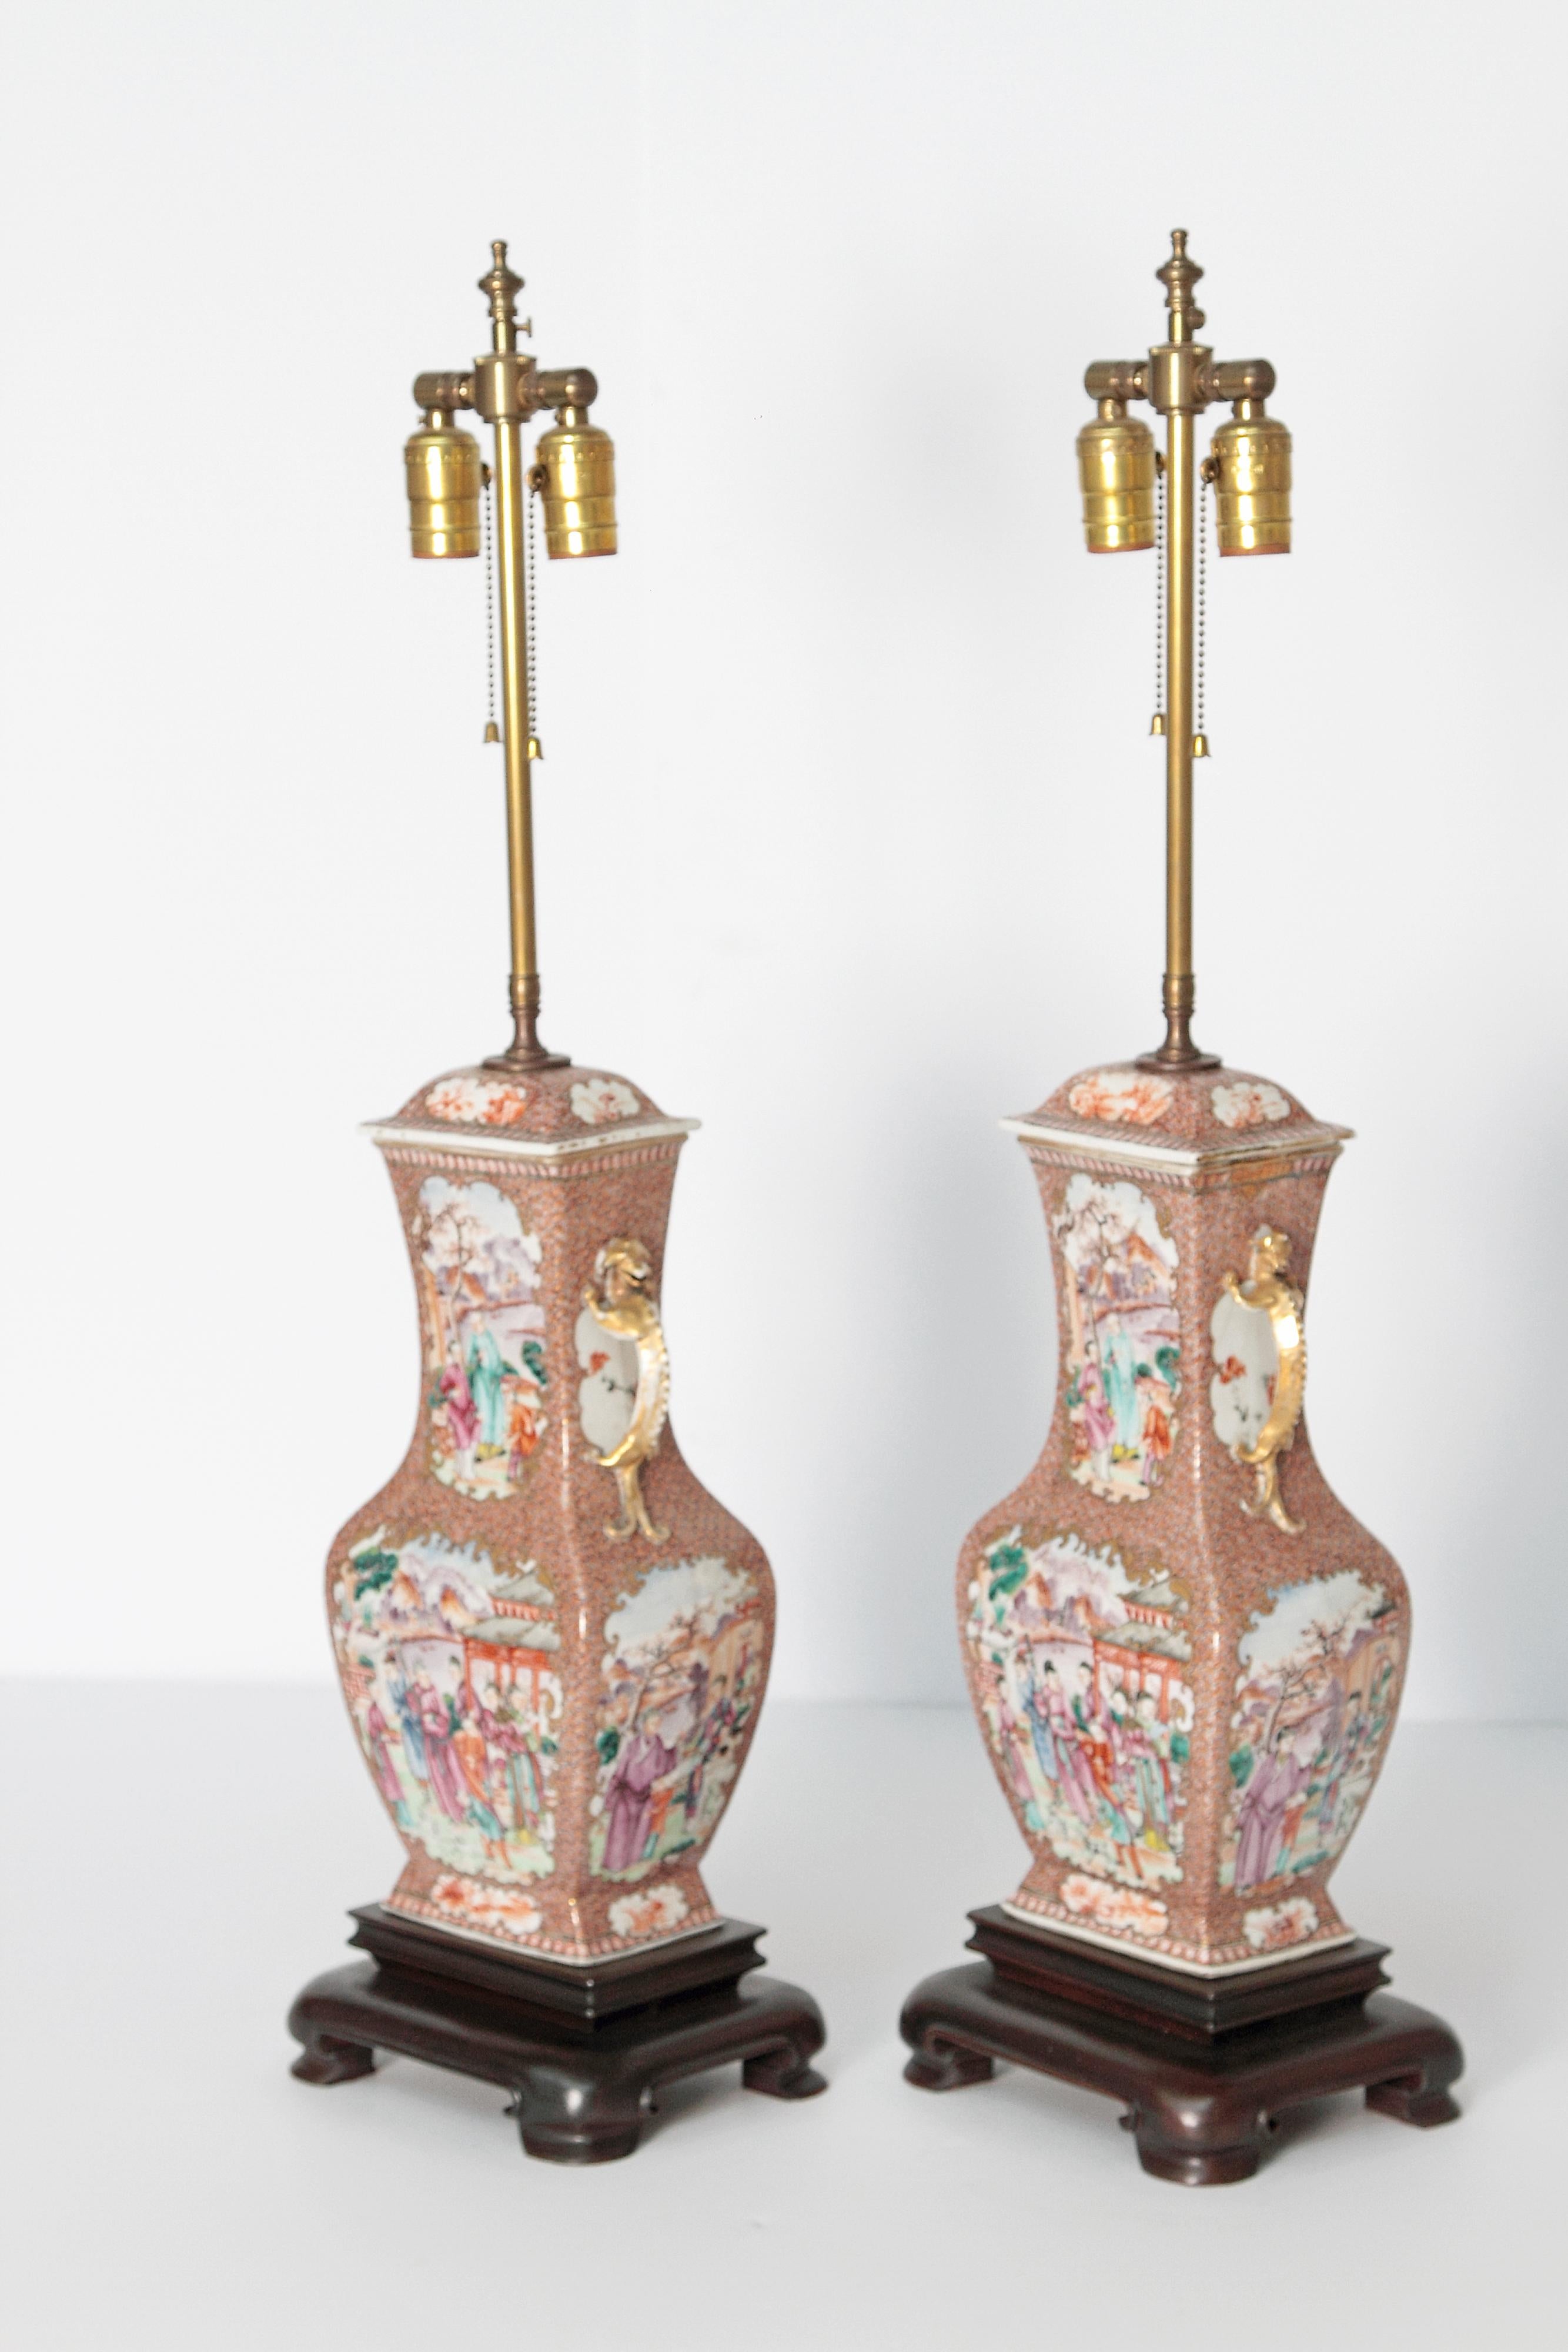 Pair of Early 19th Century Chinese Export Rose Mandarin Porcelain Jars as Lamps For Sale 7